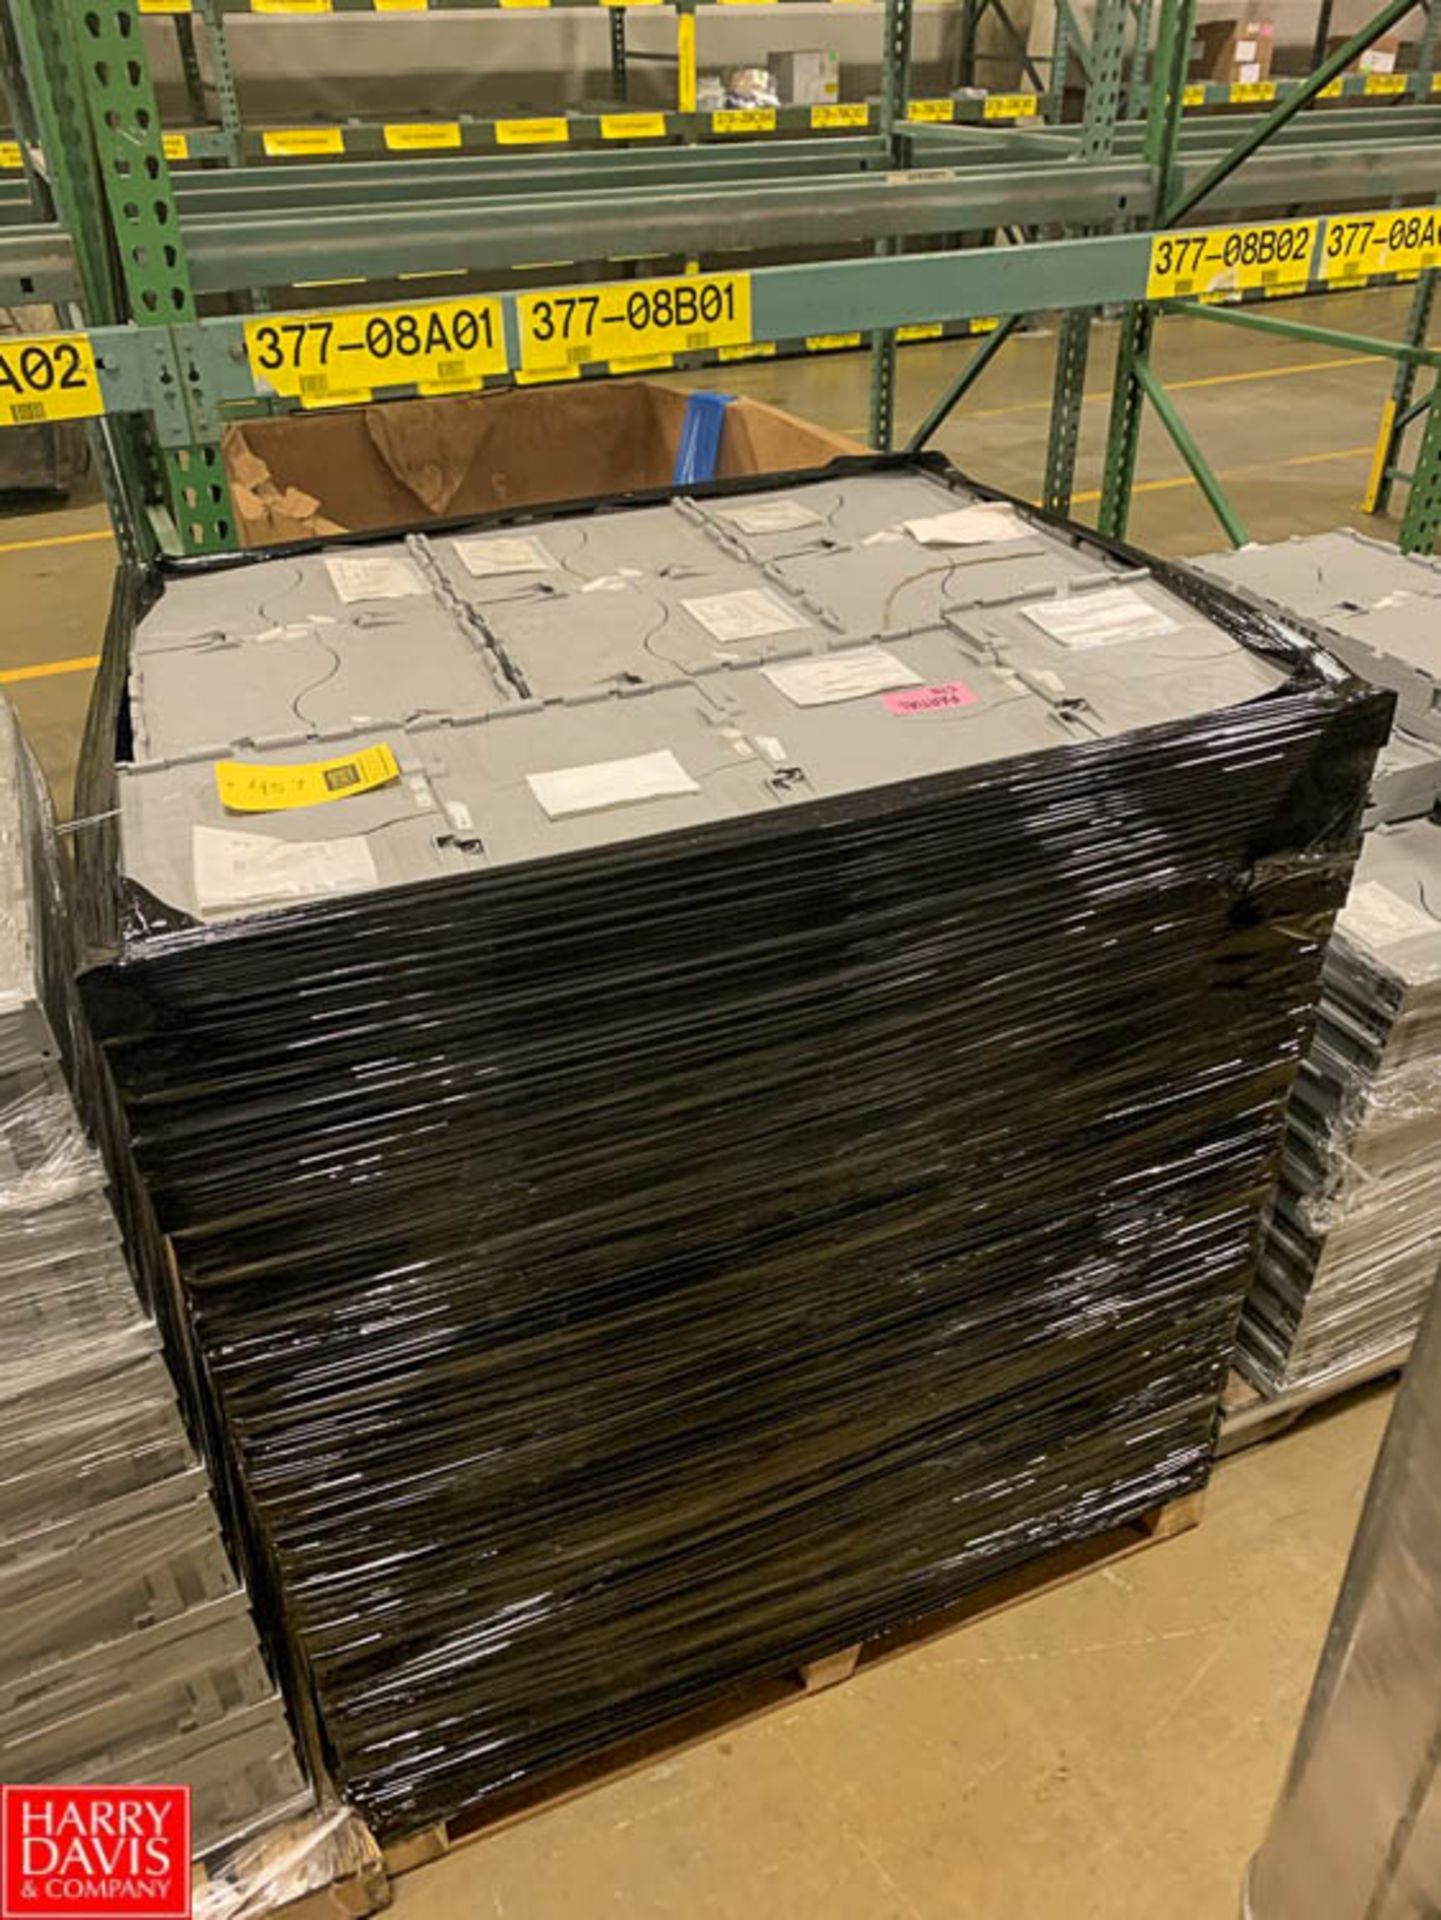 Pallet of Collapsible Plastic Bins 16"""" x 12"""" x 6"""" Rigging Fee: $30 ** ,